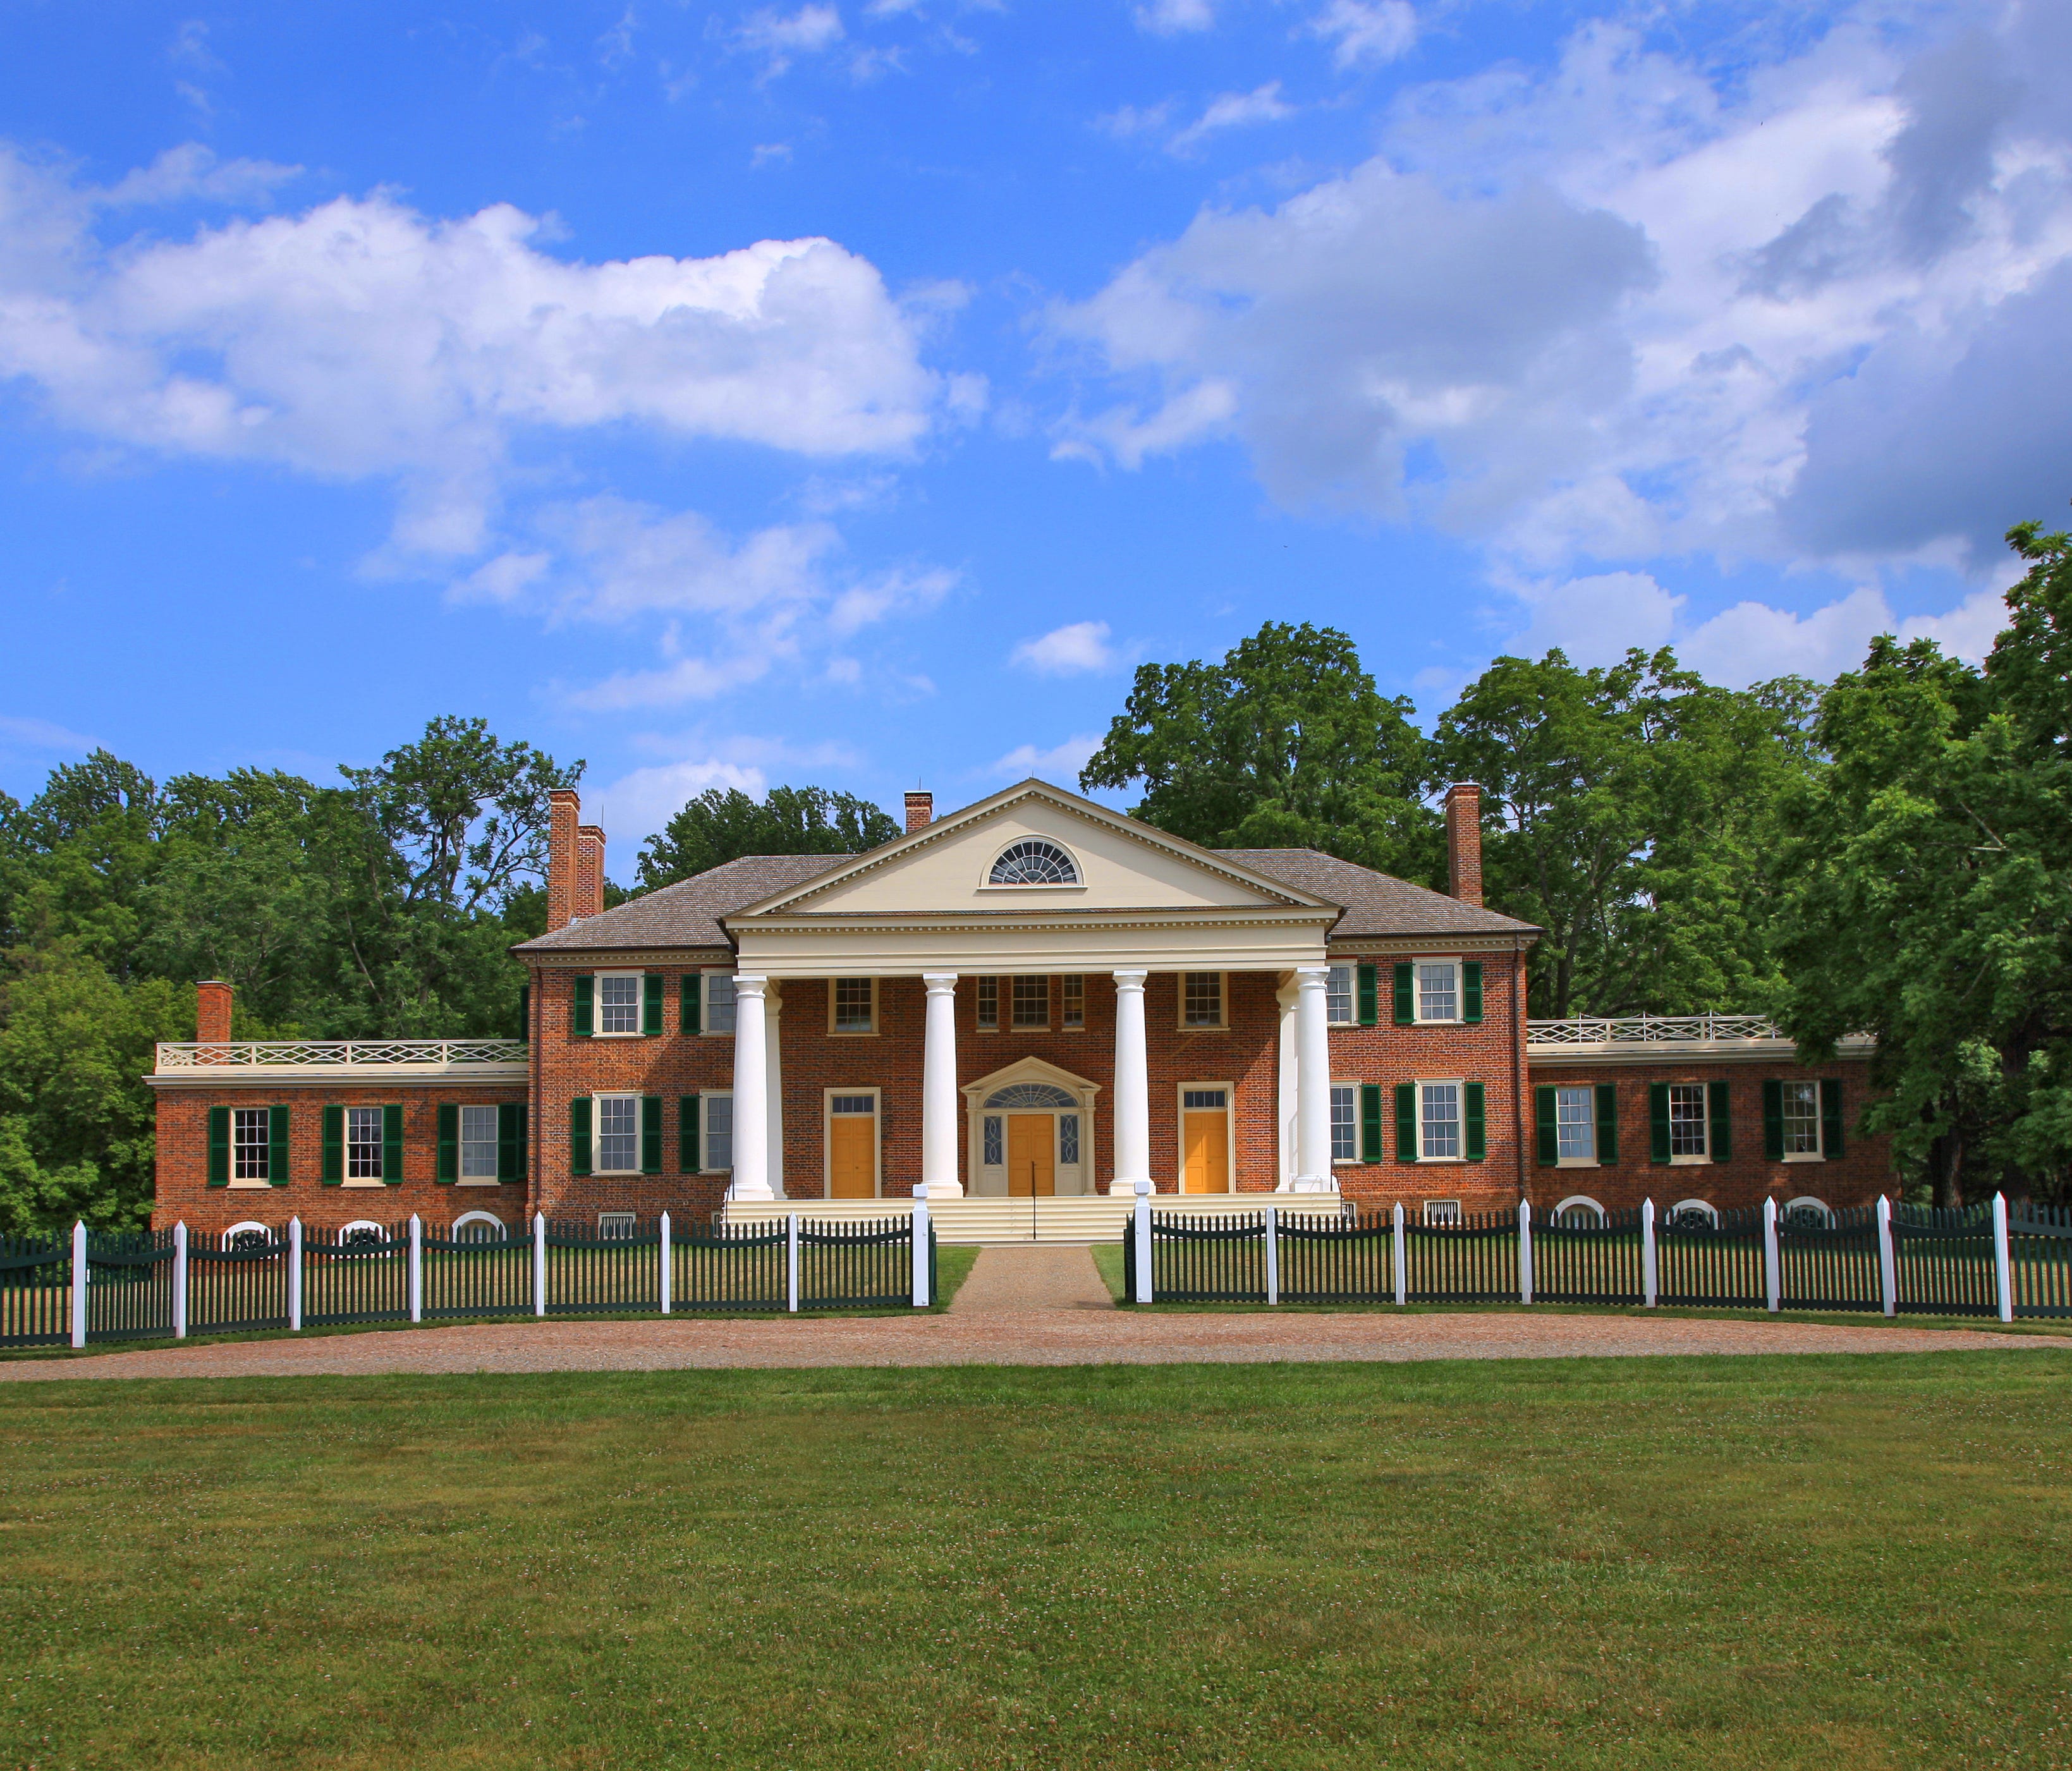 Montpelier, home of James Madison, fourth president of the United States, father of the Constitution and architect of the Bill of Rights. Between 2003-2008, the Home underwent a complete restoration to return it to the Madisons' retirement era of the